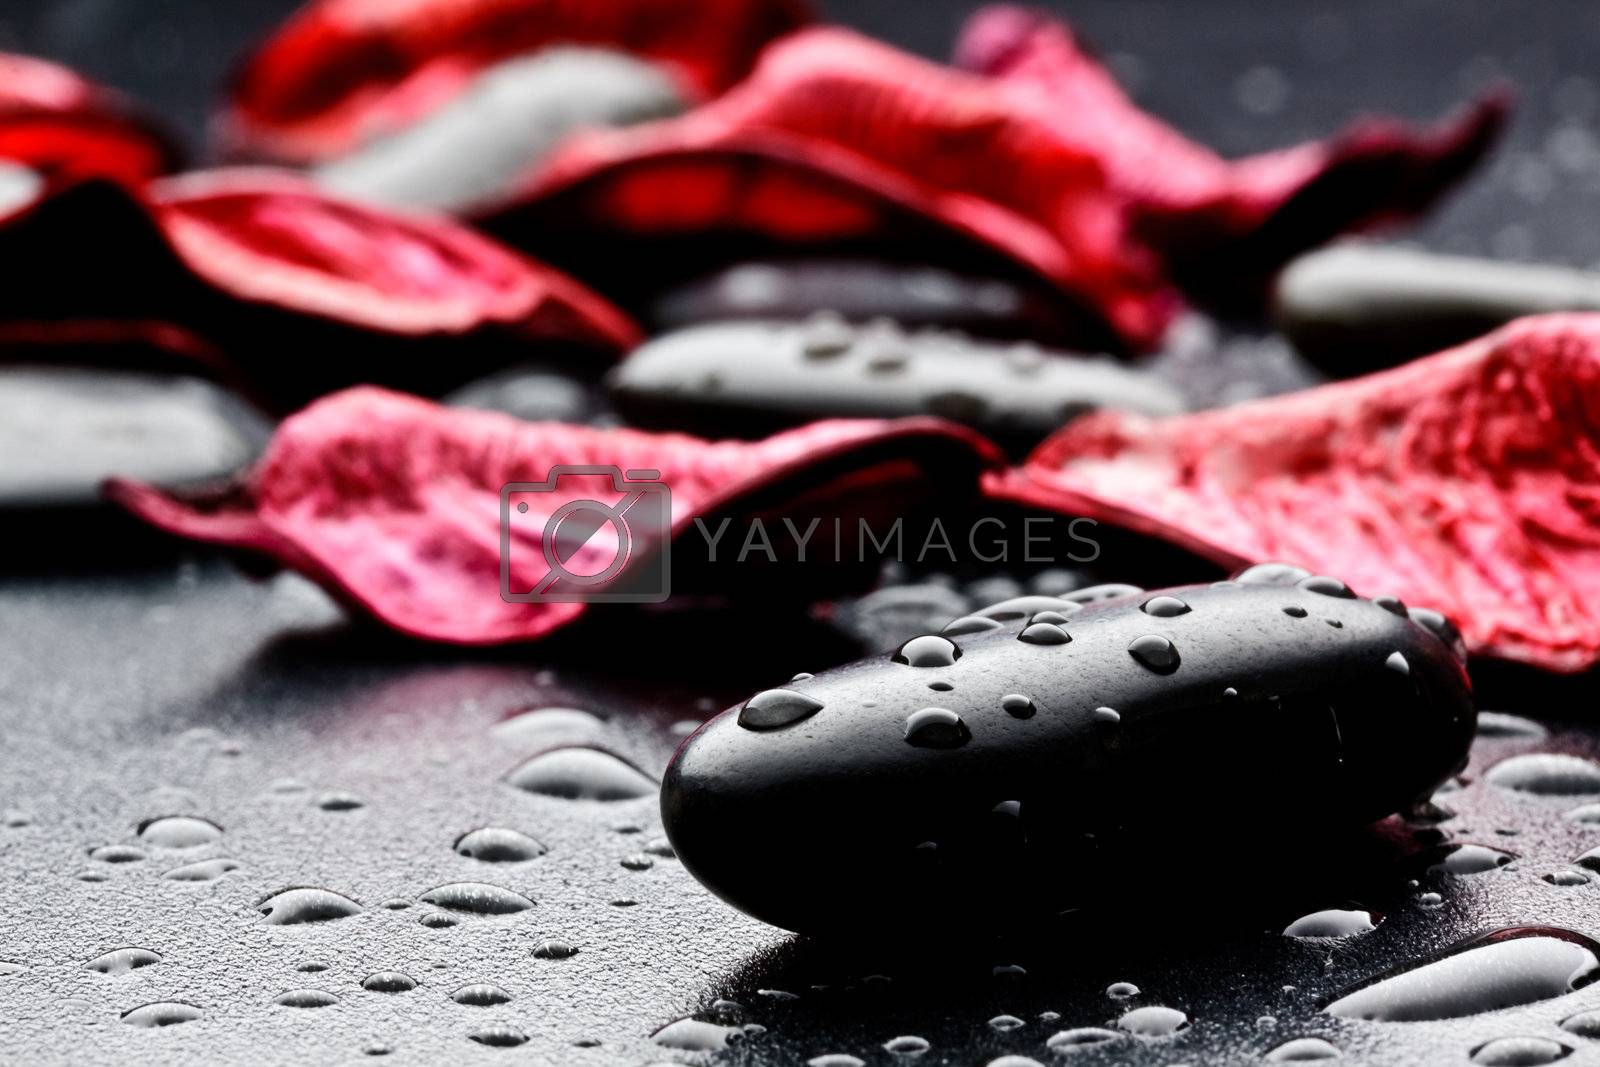 Royalty free image of wet black stones and petal by maxg71